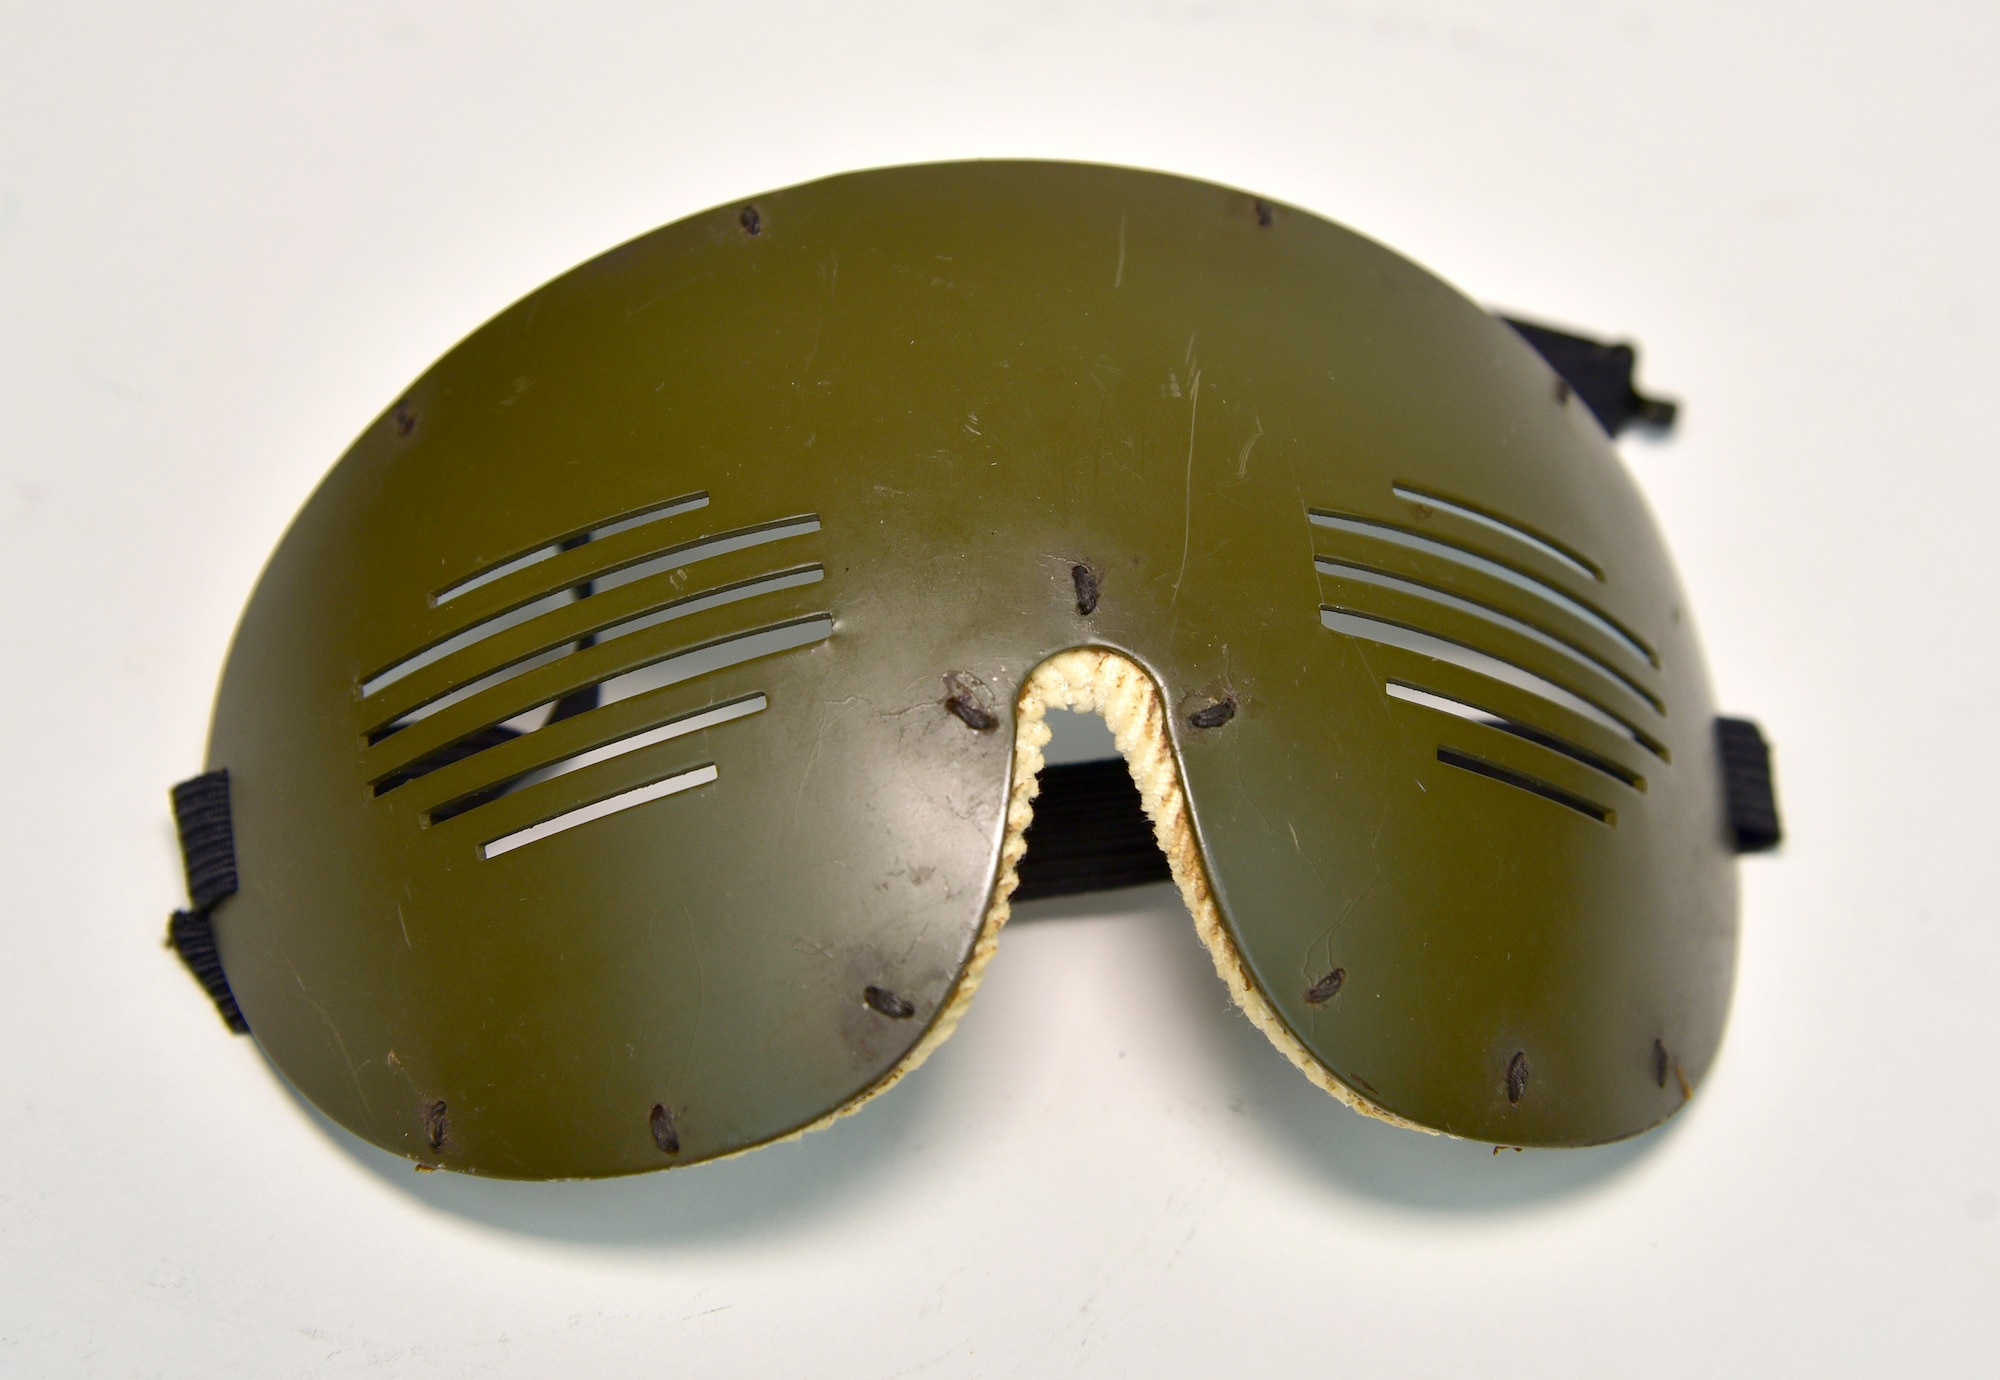 Plans call for this artifact to be displayed near the B-17F Memphis Belle™ as part of the new strategic bombardment exhibit in the WWII Gallery, which opens to the public on May 17, 2018. Armored flak goggles issued to Memphis Belle navigator Capt Charles “Chuck” Leighton.